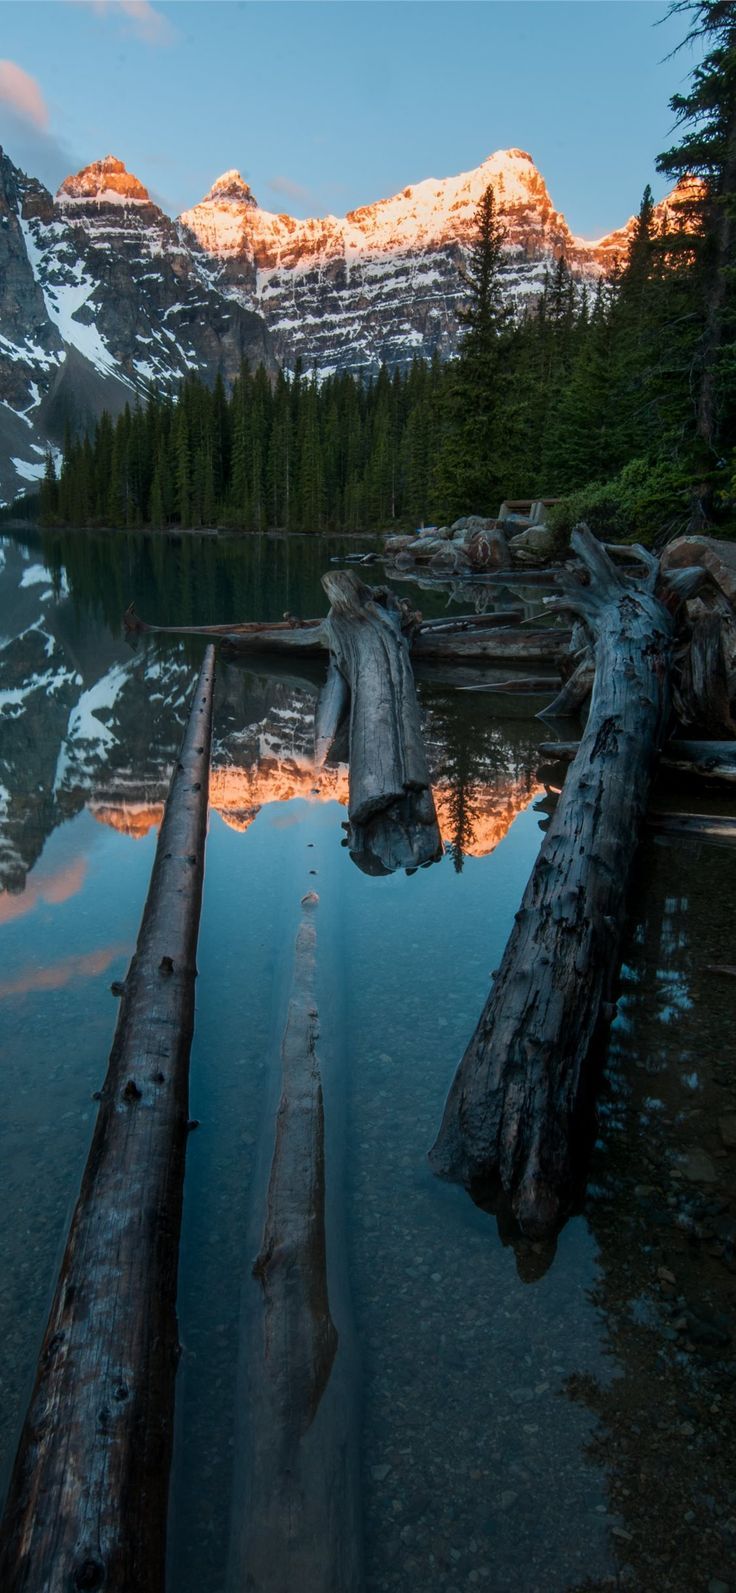 Logs and mountains are reflected in a lake. - Lake